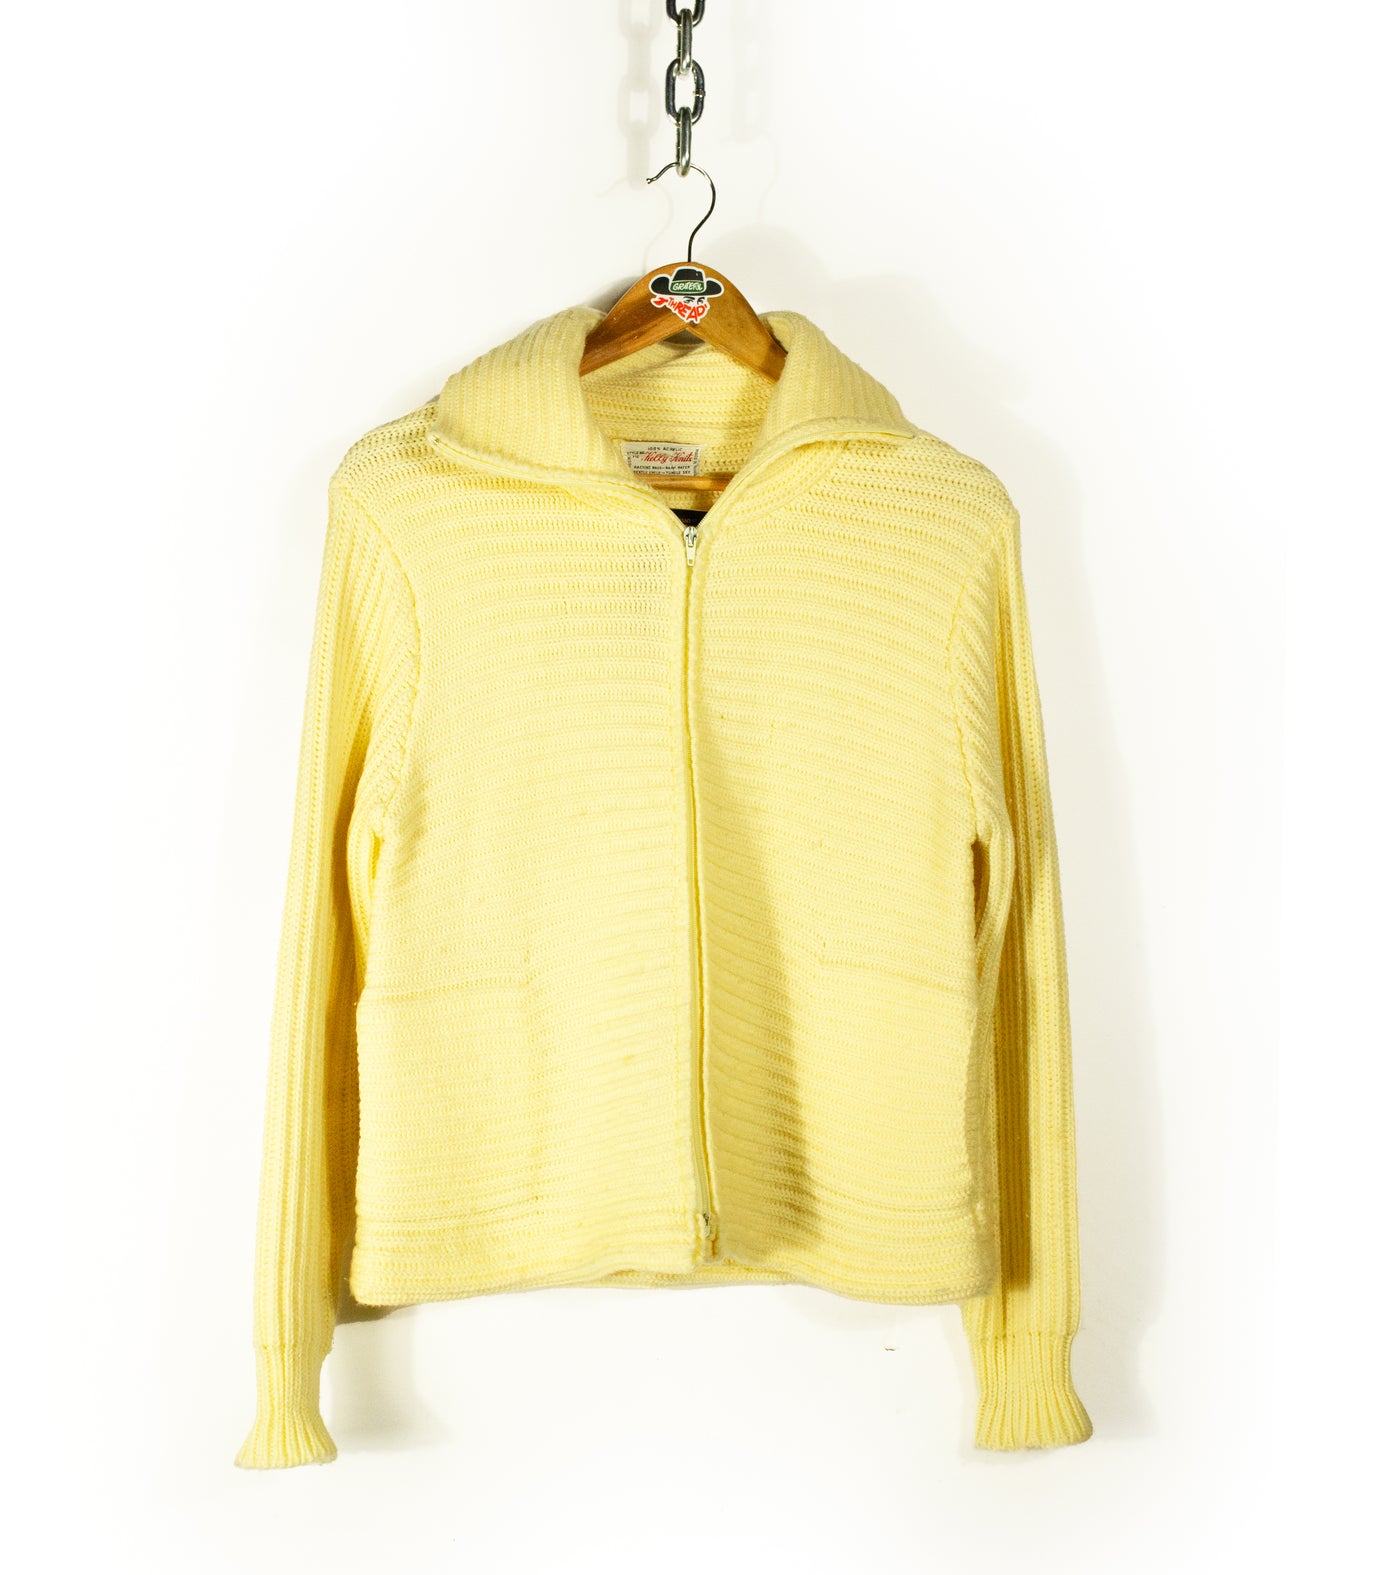 Vintage 70s Kelly Knits Zip Up Sweater